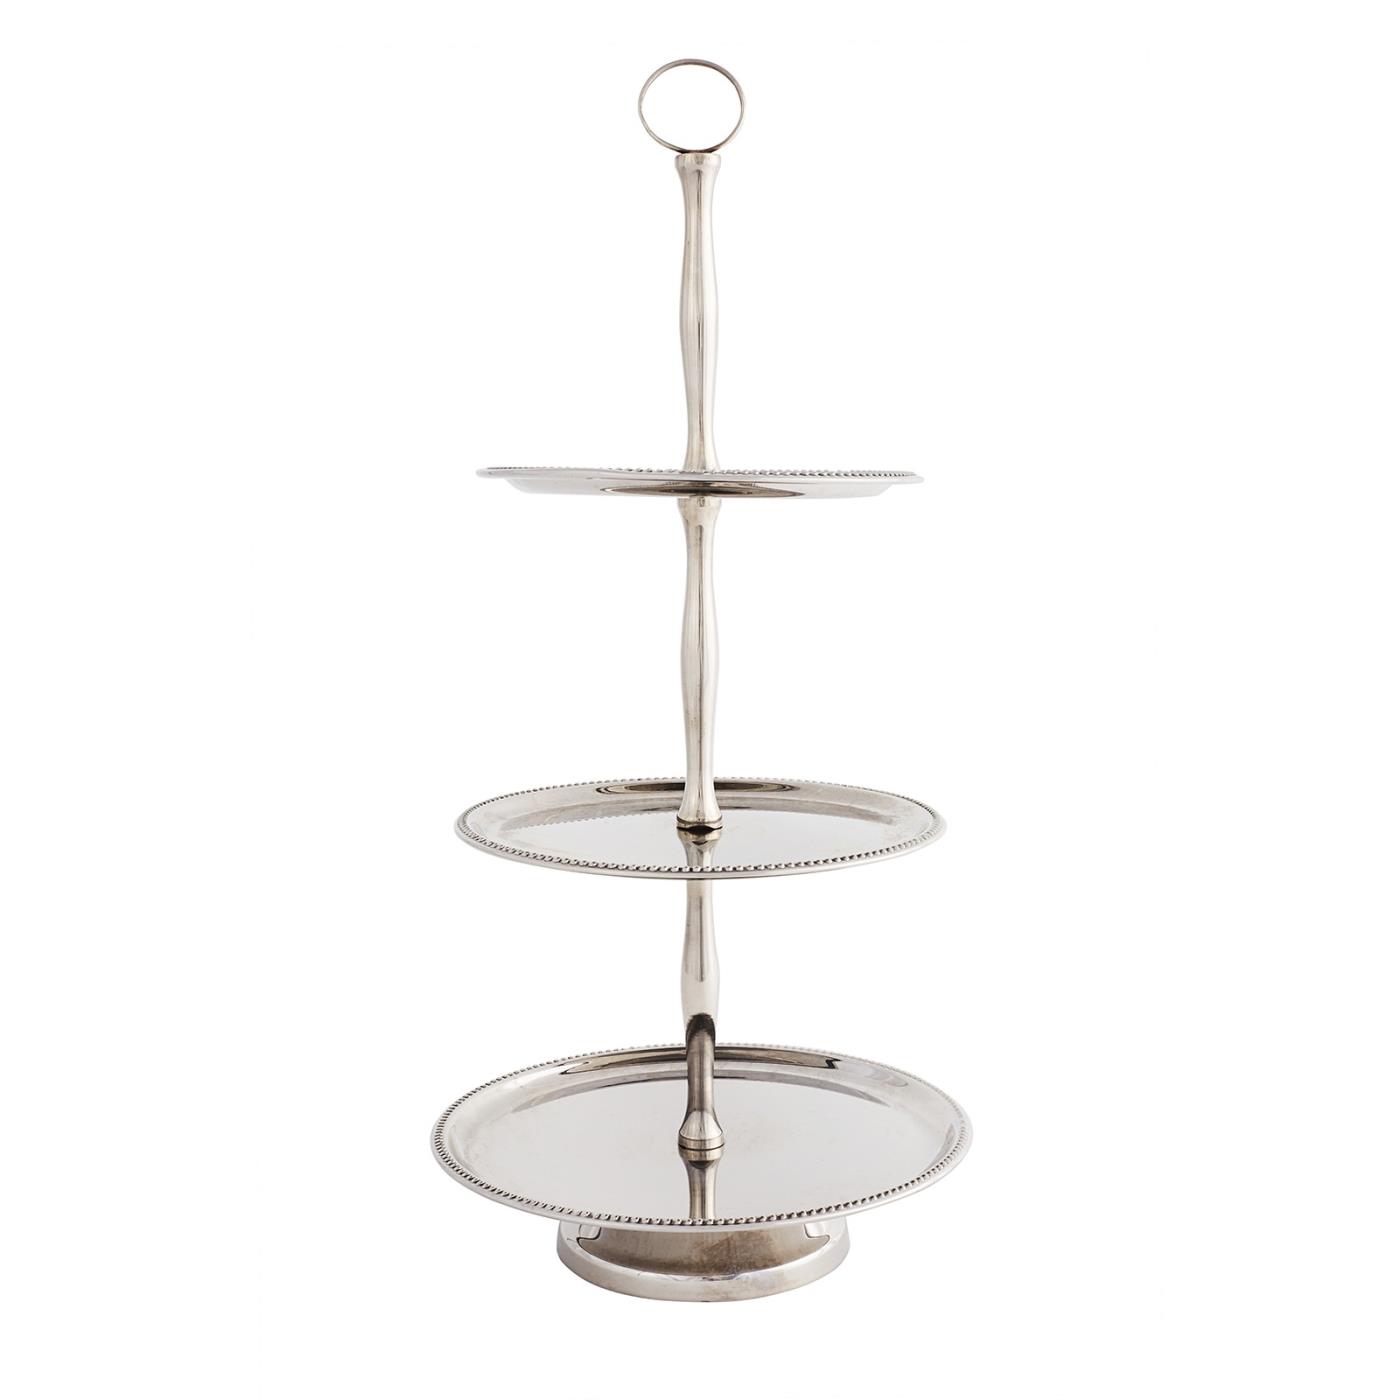 Medium Stands - 3-Tier Silver Stand, Round Beaded Tall